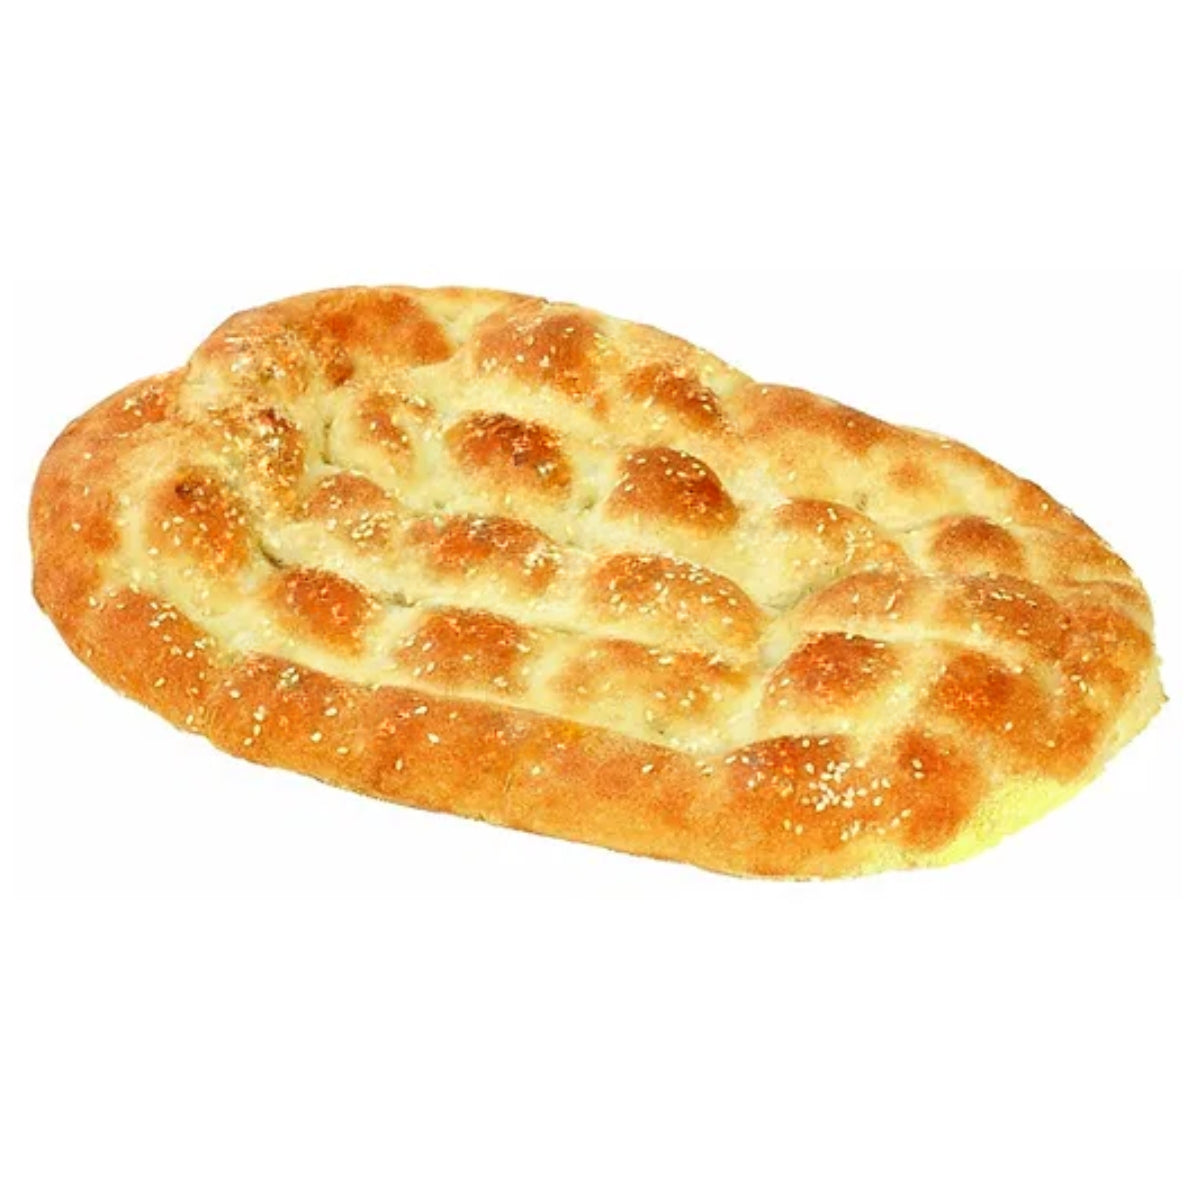 A Oz Bakery - Turkish Pide Bread - 1pcs on a white background.